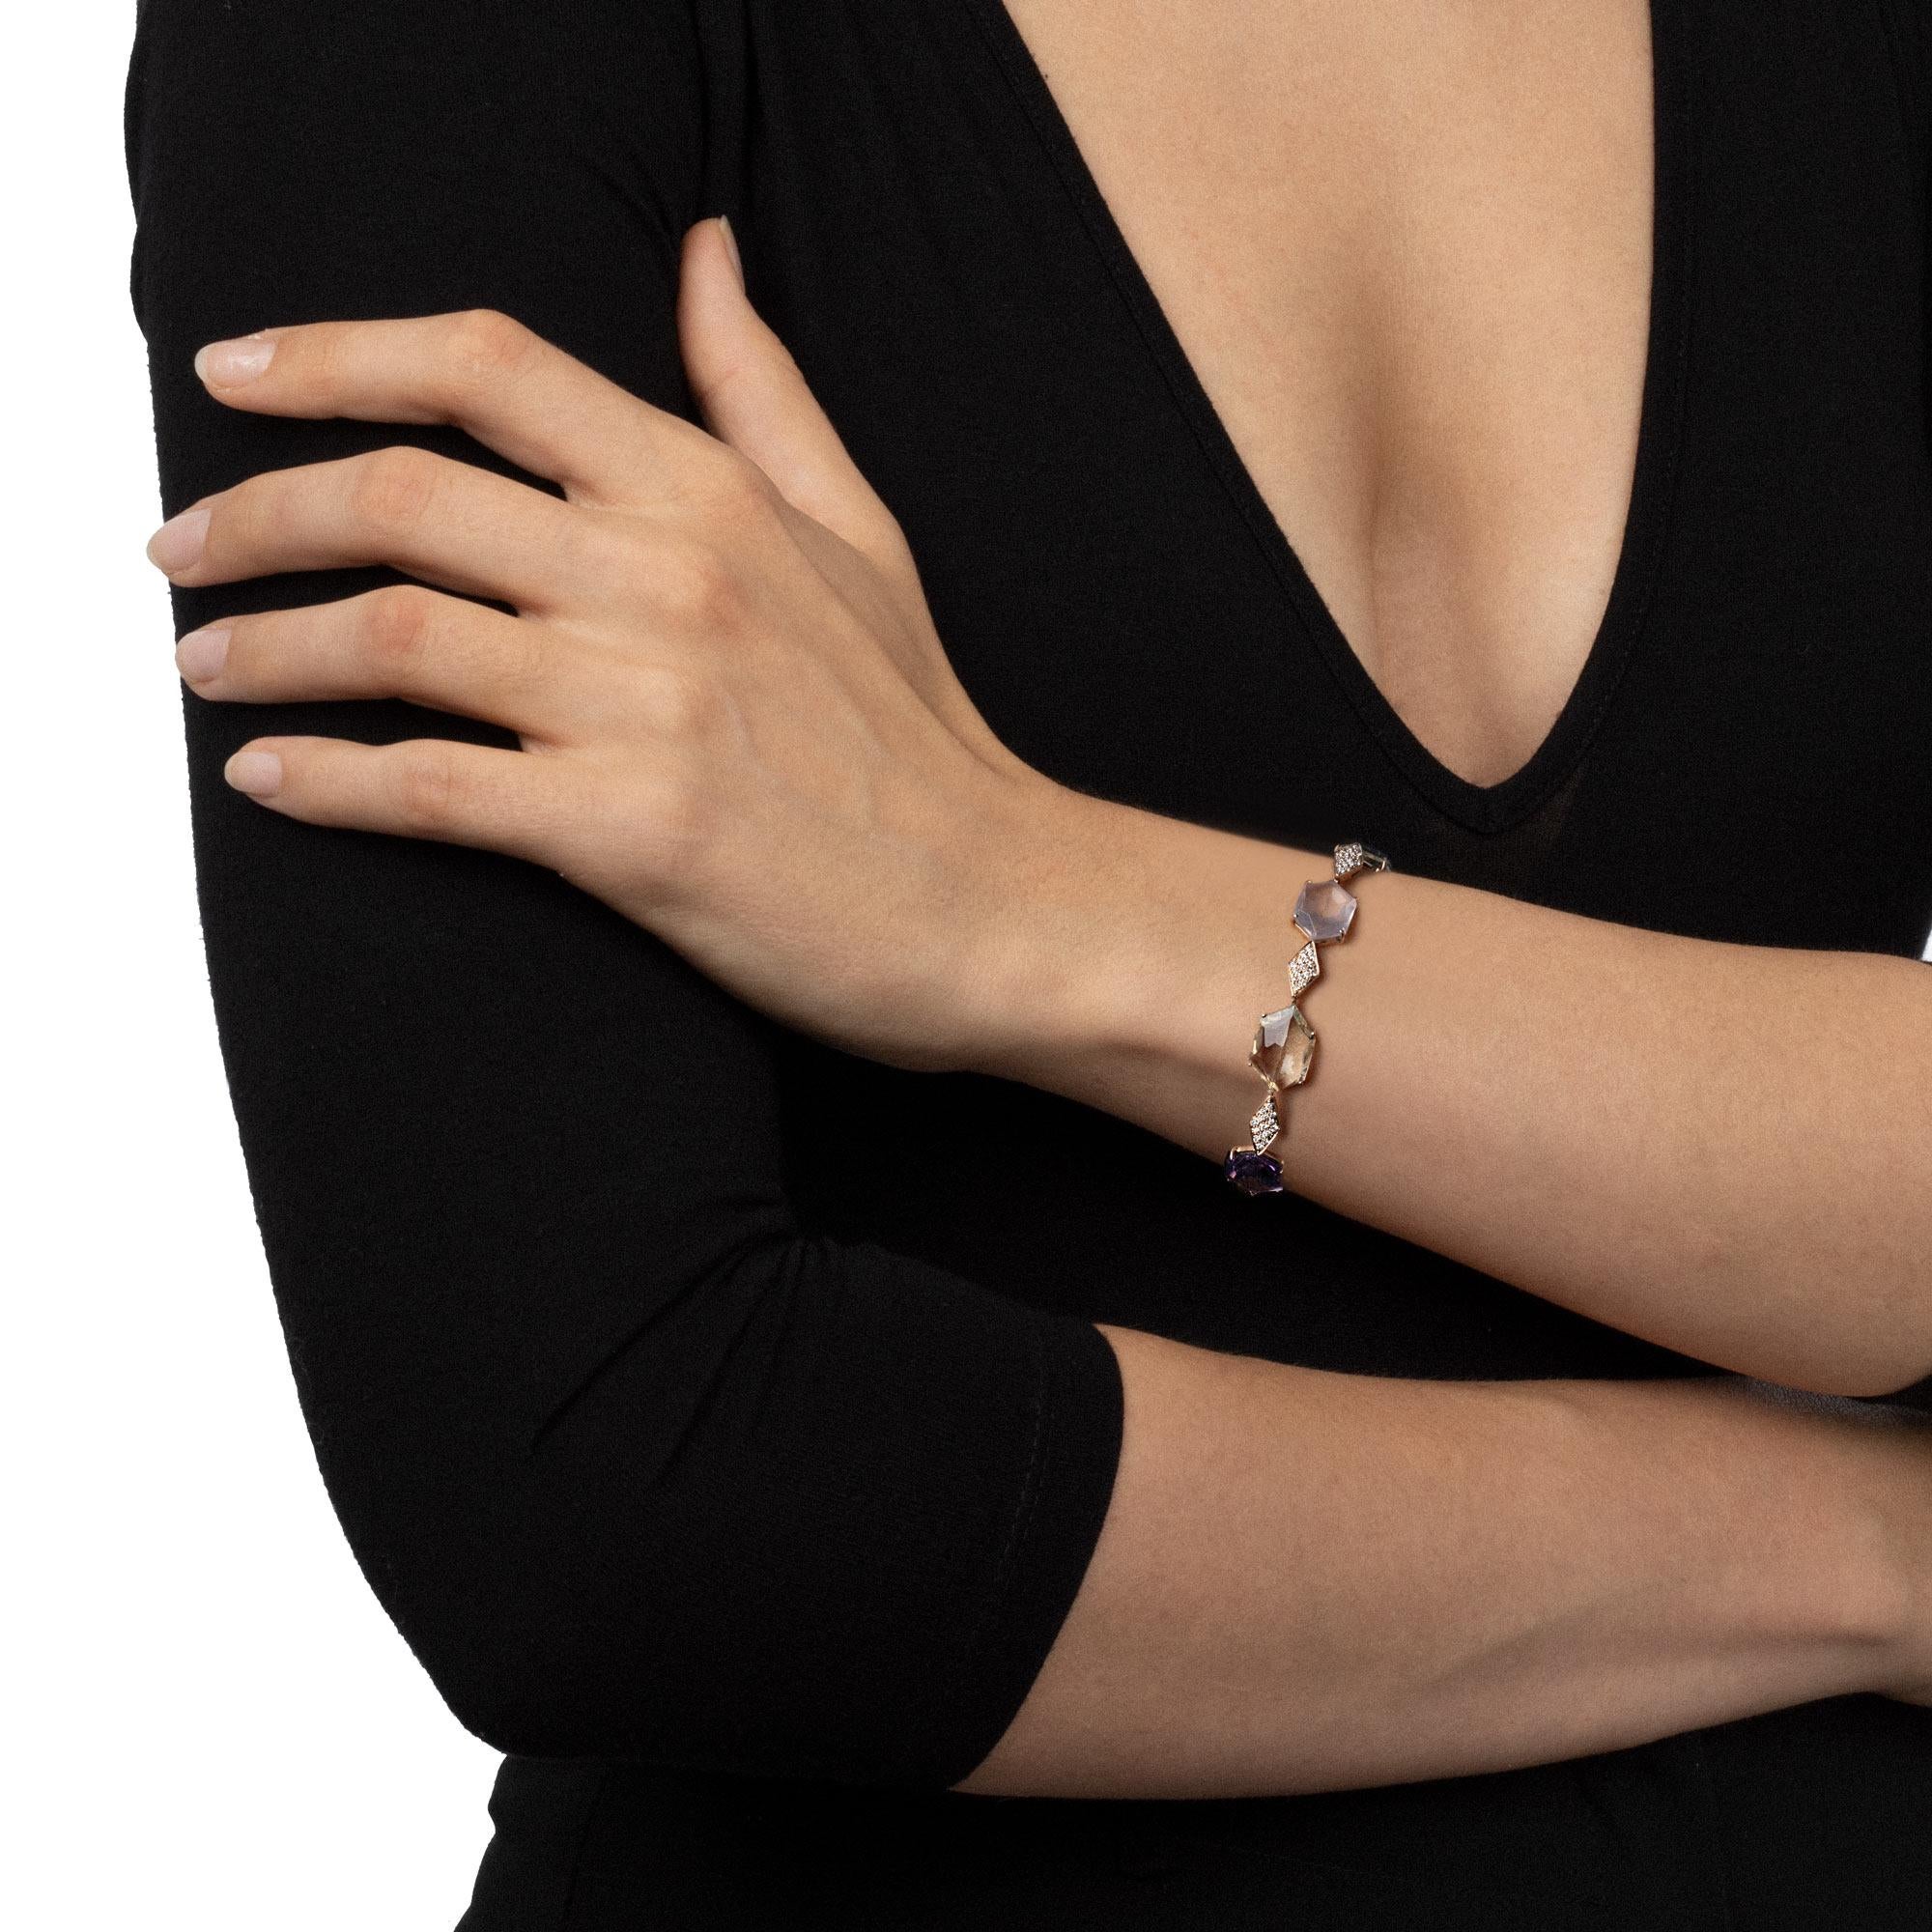 A handmade contemporary jewellery piece with a modern design that is bold and sophisticated at the same time. Its distinctive asymmetrical setting lets the gemstones sparkle bright around your wrist Illuminating the wrist with the warm tones of